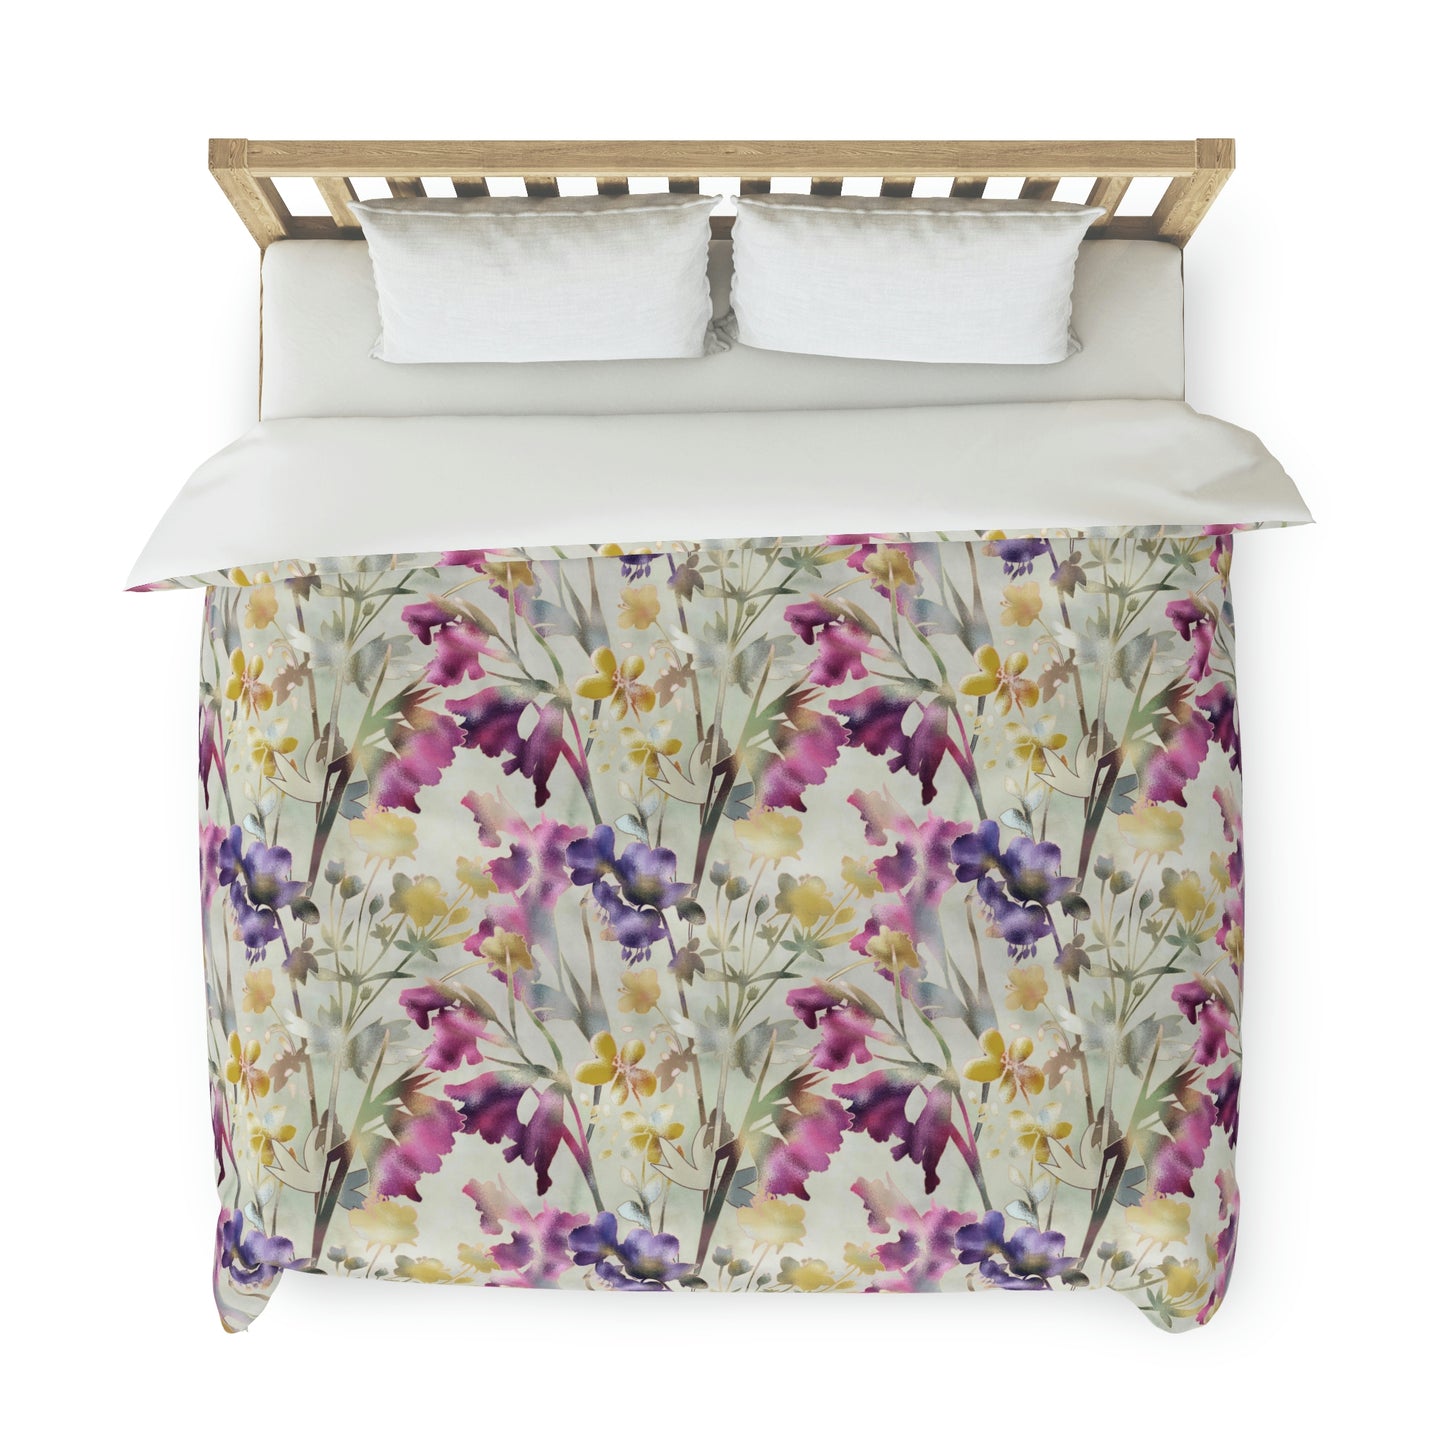 Green, Pink & Purple Floral Duvet Cover lying on a bed, microfiber floral duvet cover bedroom accent